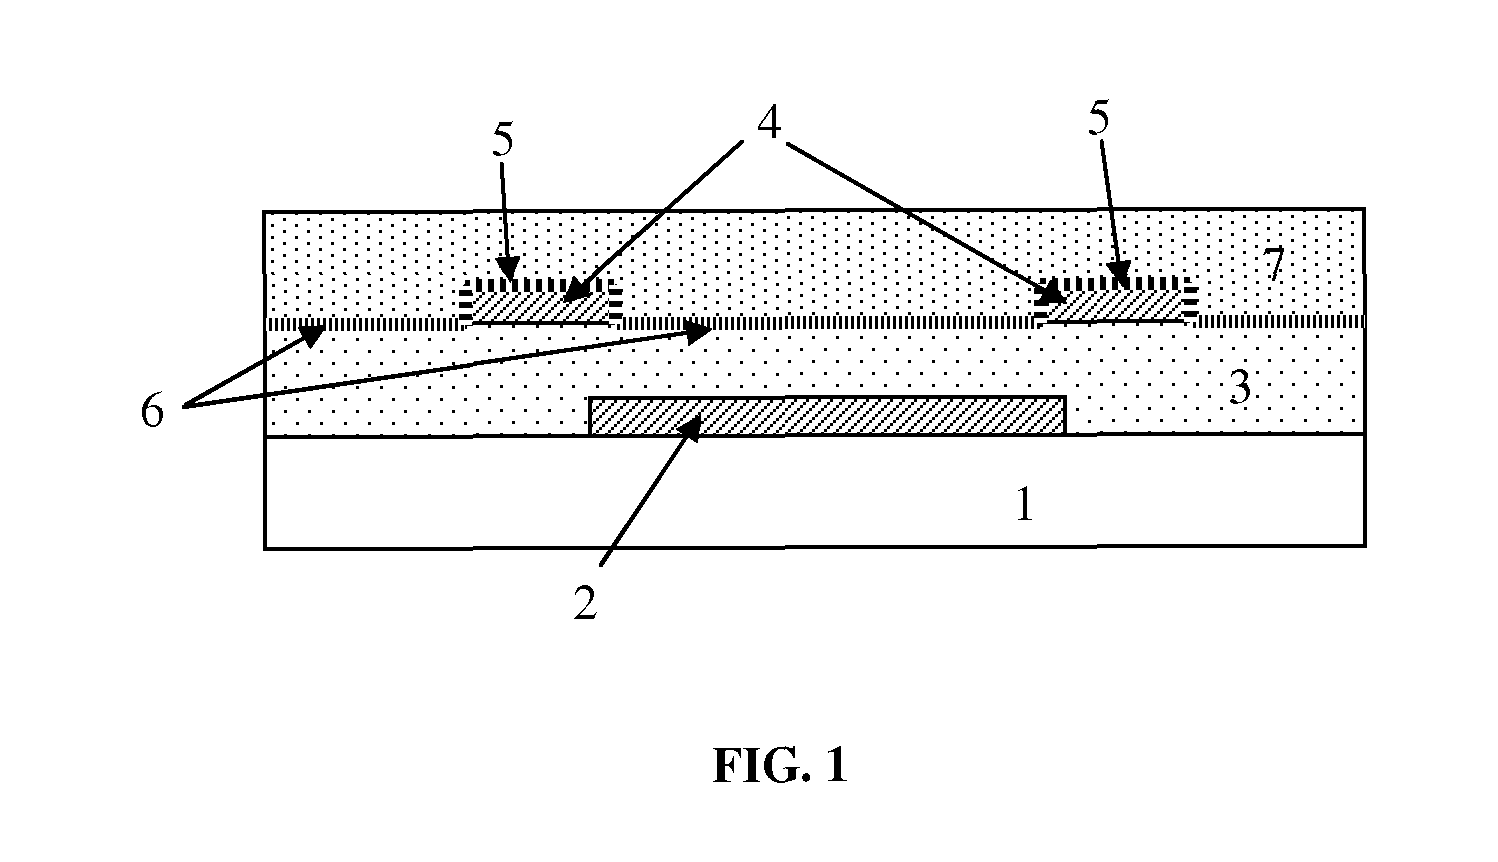 Method for Fabricating Organic Devices